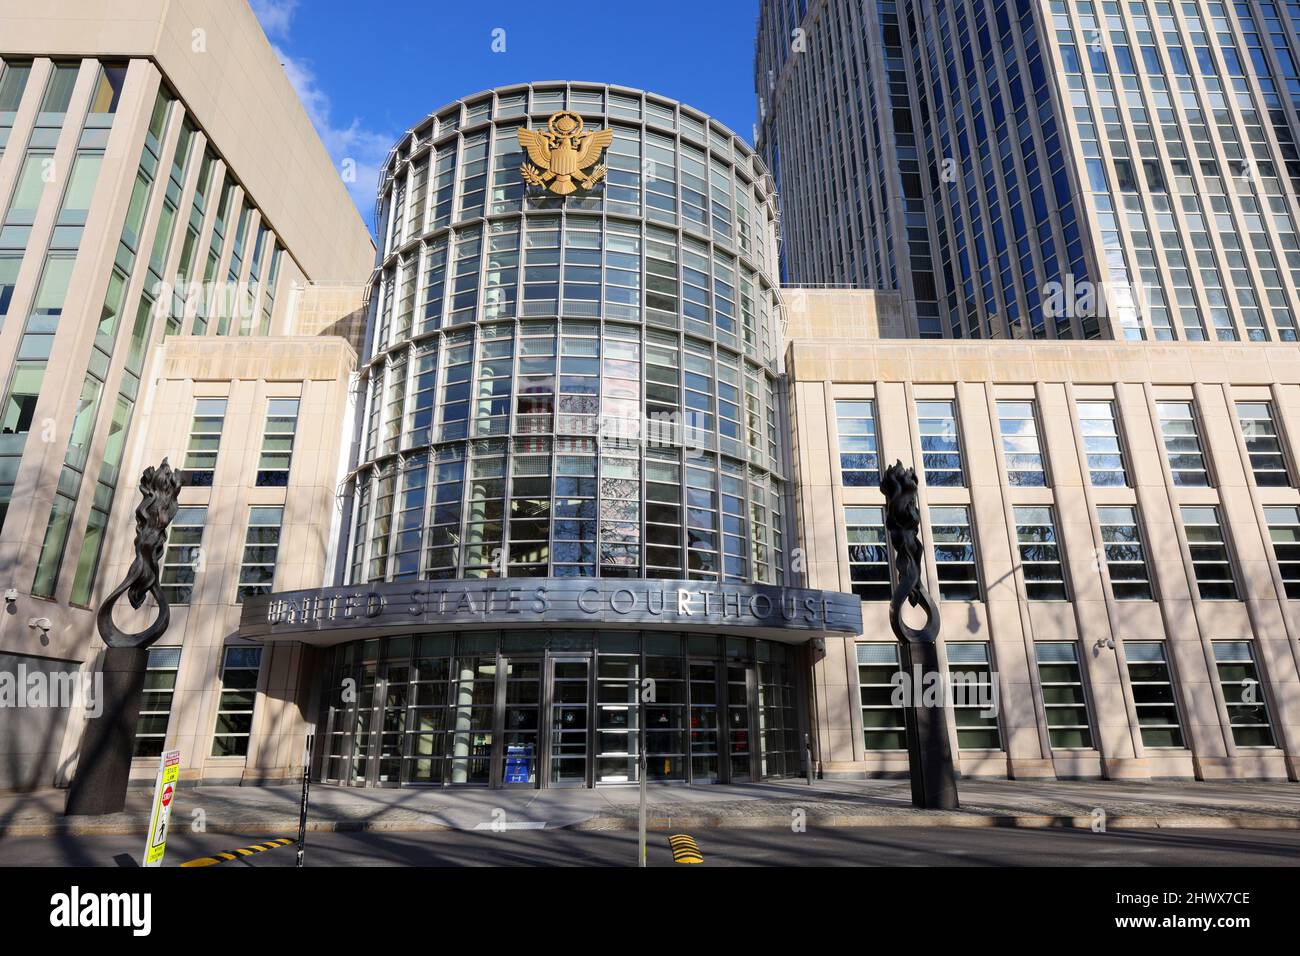 United States District Court for the Eastern District of New York, 225 Cadman Plaza E, Brooklyn, NY. Außenansicht des Brooklyn Federal Court House. Stockfoto